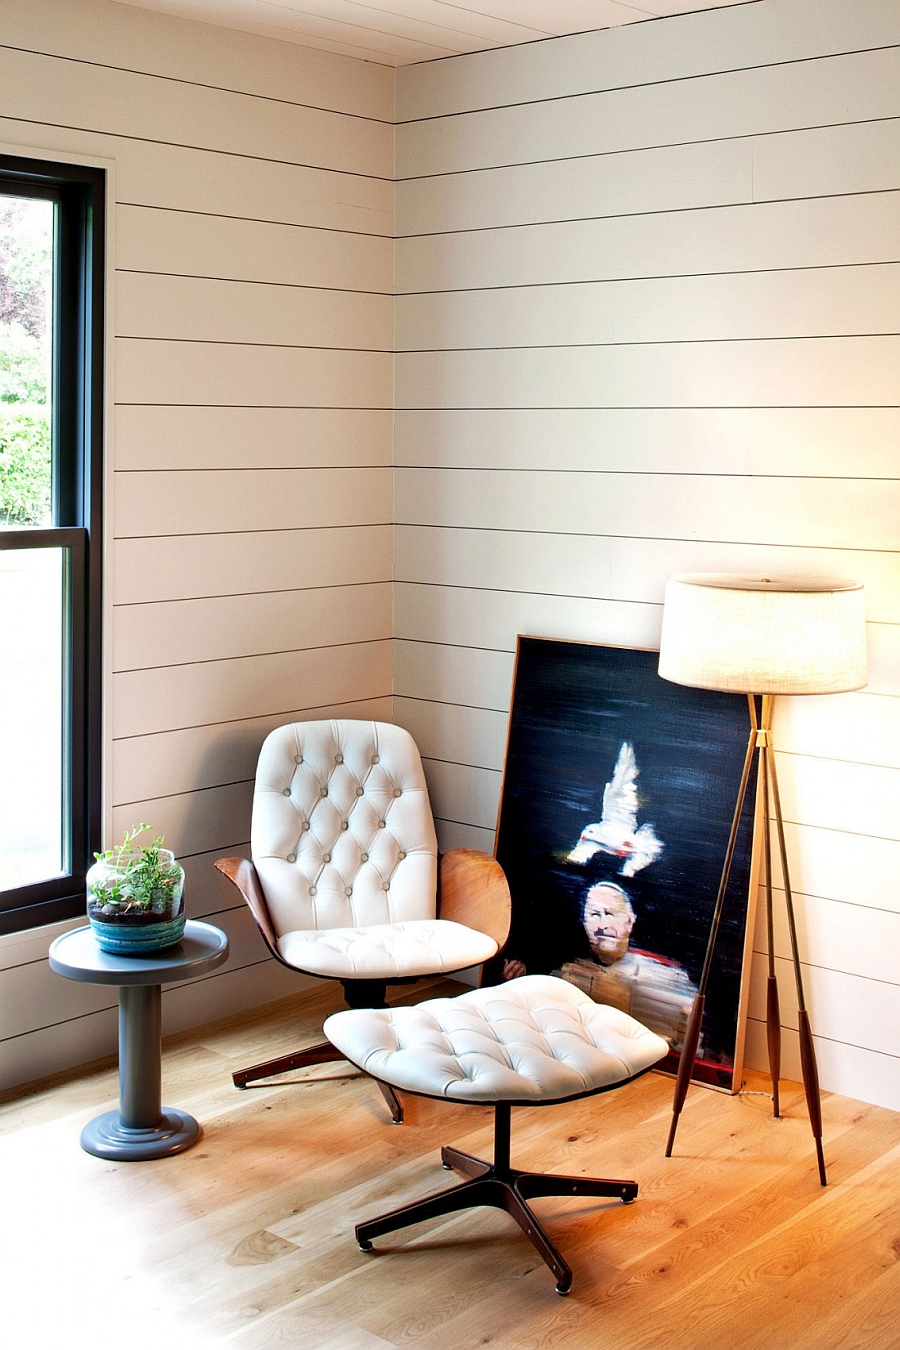 Vintage chair in the corner shapes a cozy reading nook